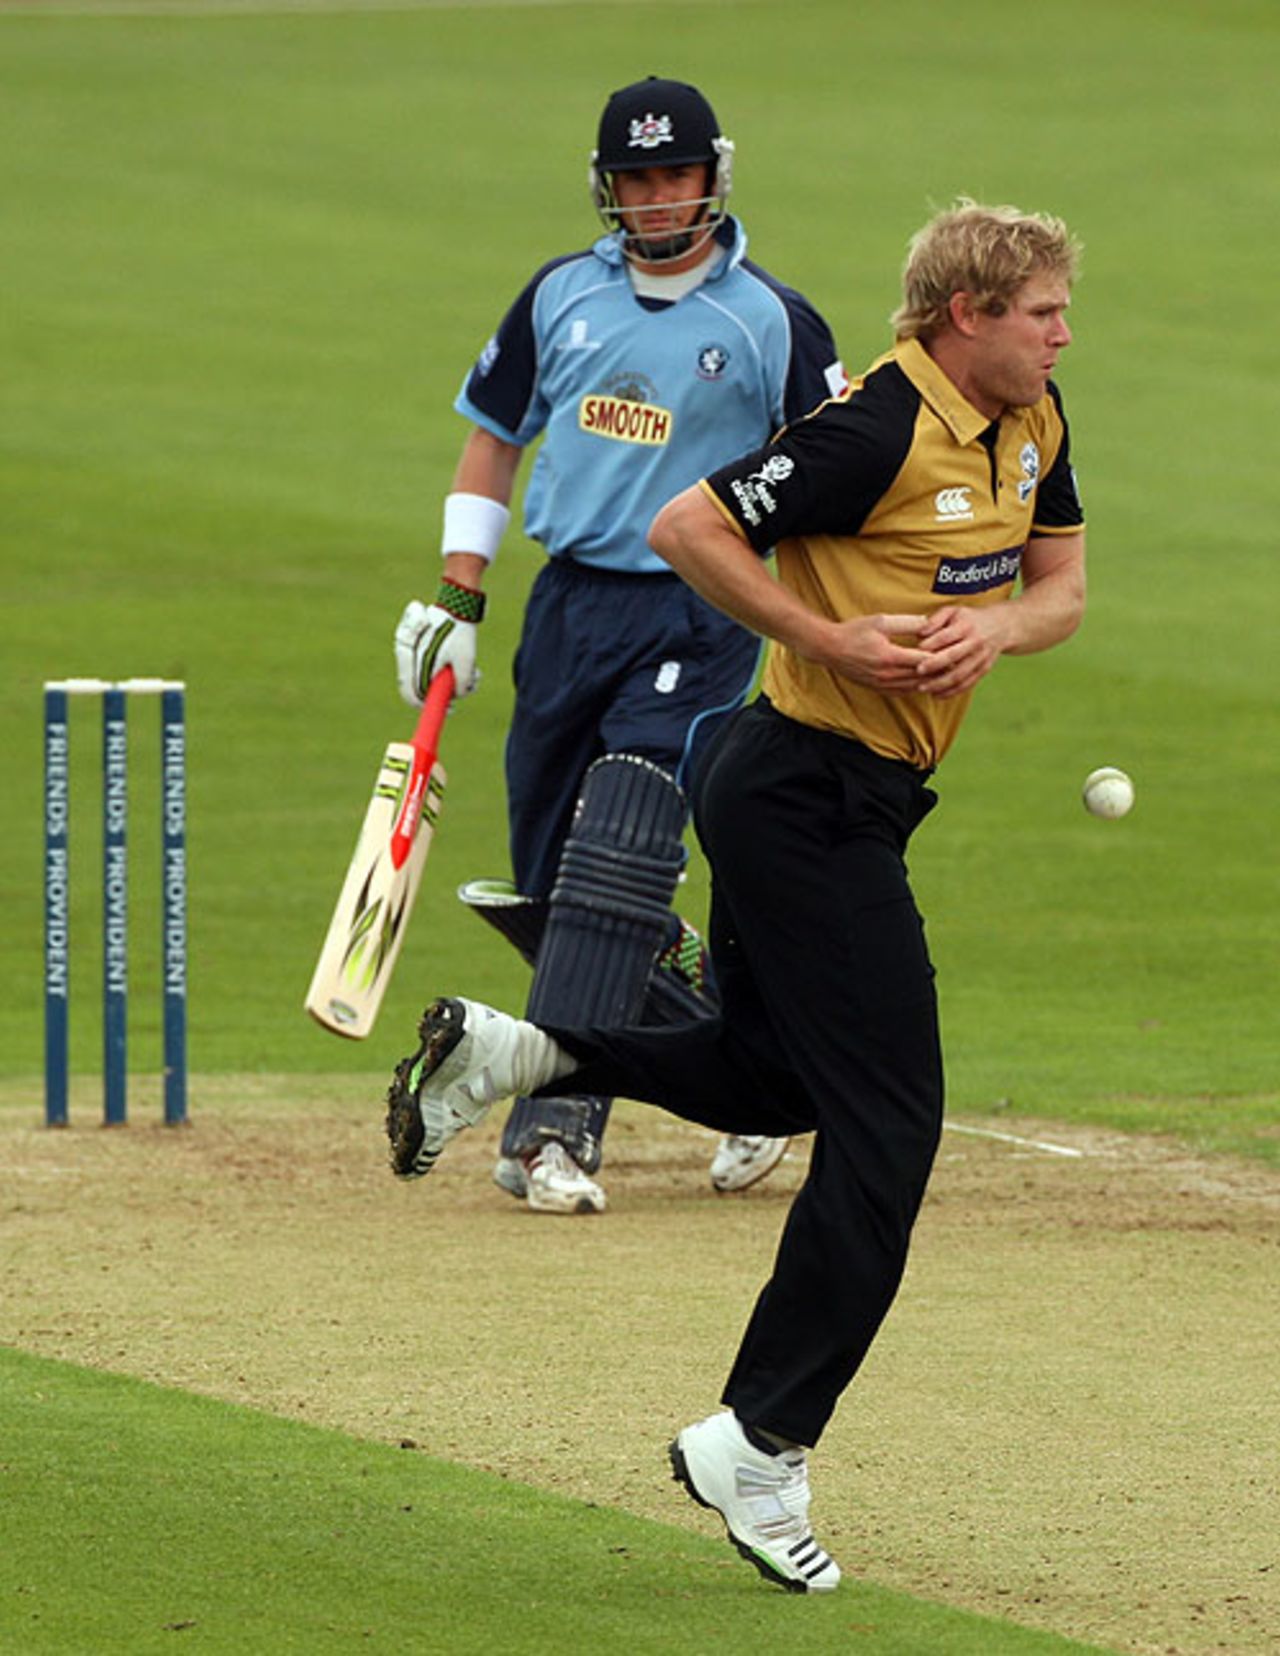 Matthew Hoggard gets out of the way of a Marcus North shot, Gloucestershire v Yorkshire, Friends Provident Trophy quarter-final, Bristol, June 4, 2008